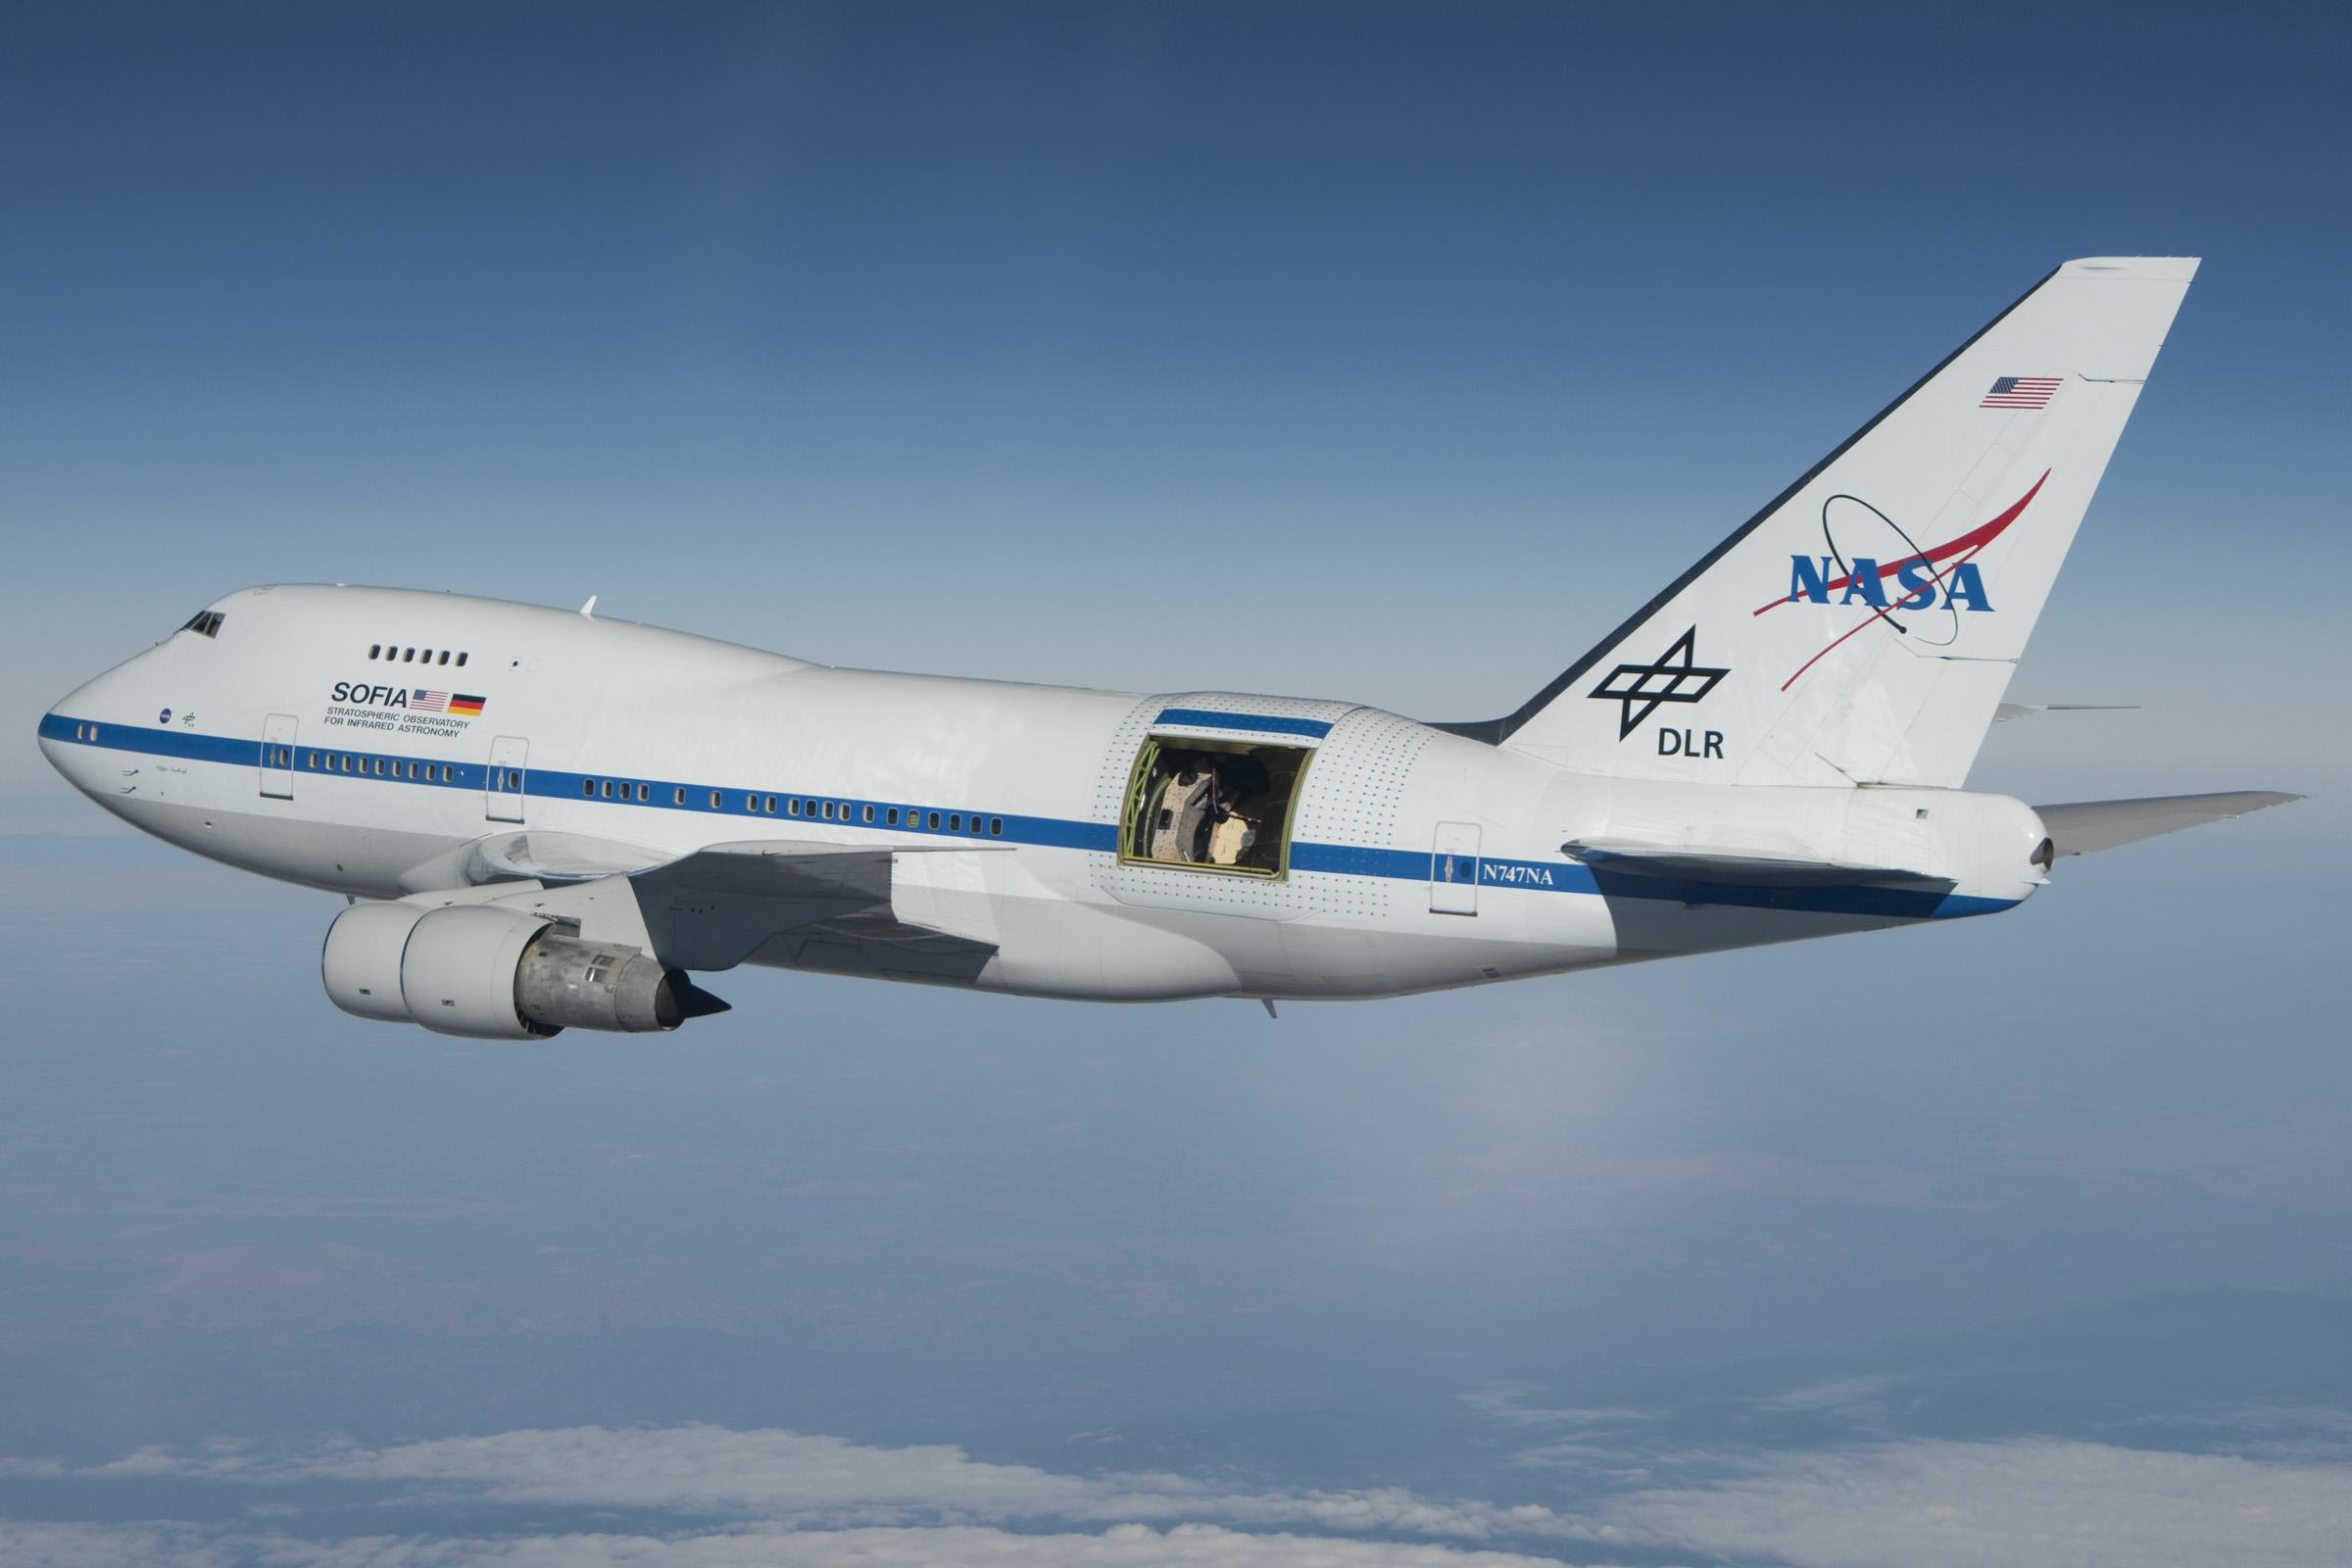 NASA's SOFIA Boeing 747's Journey Comes To An End